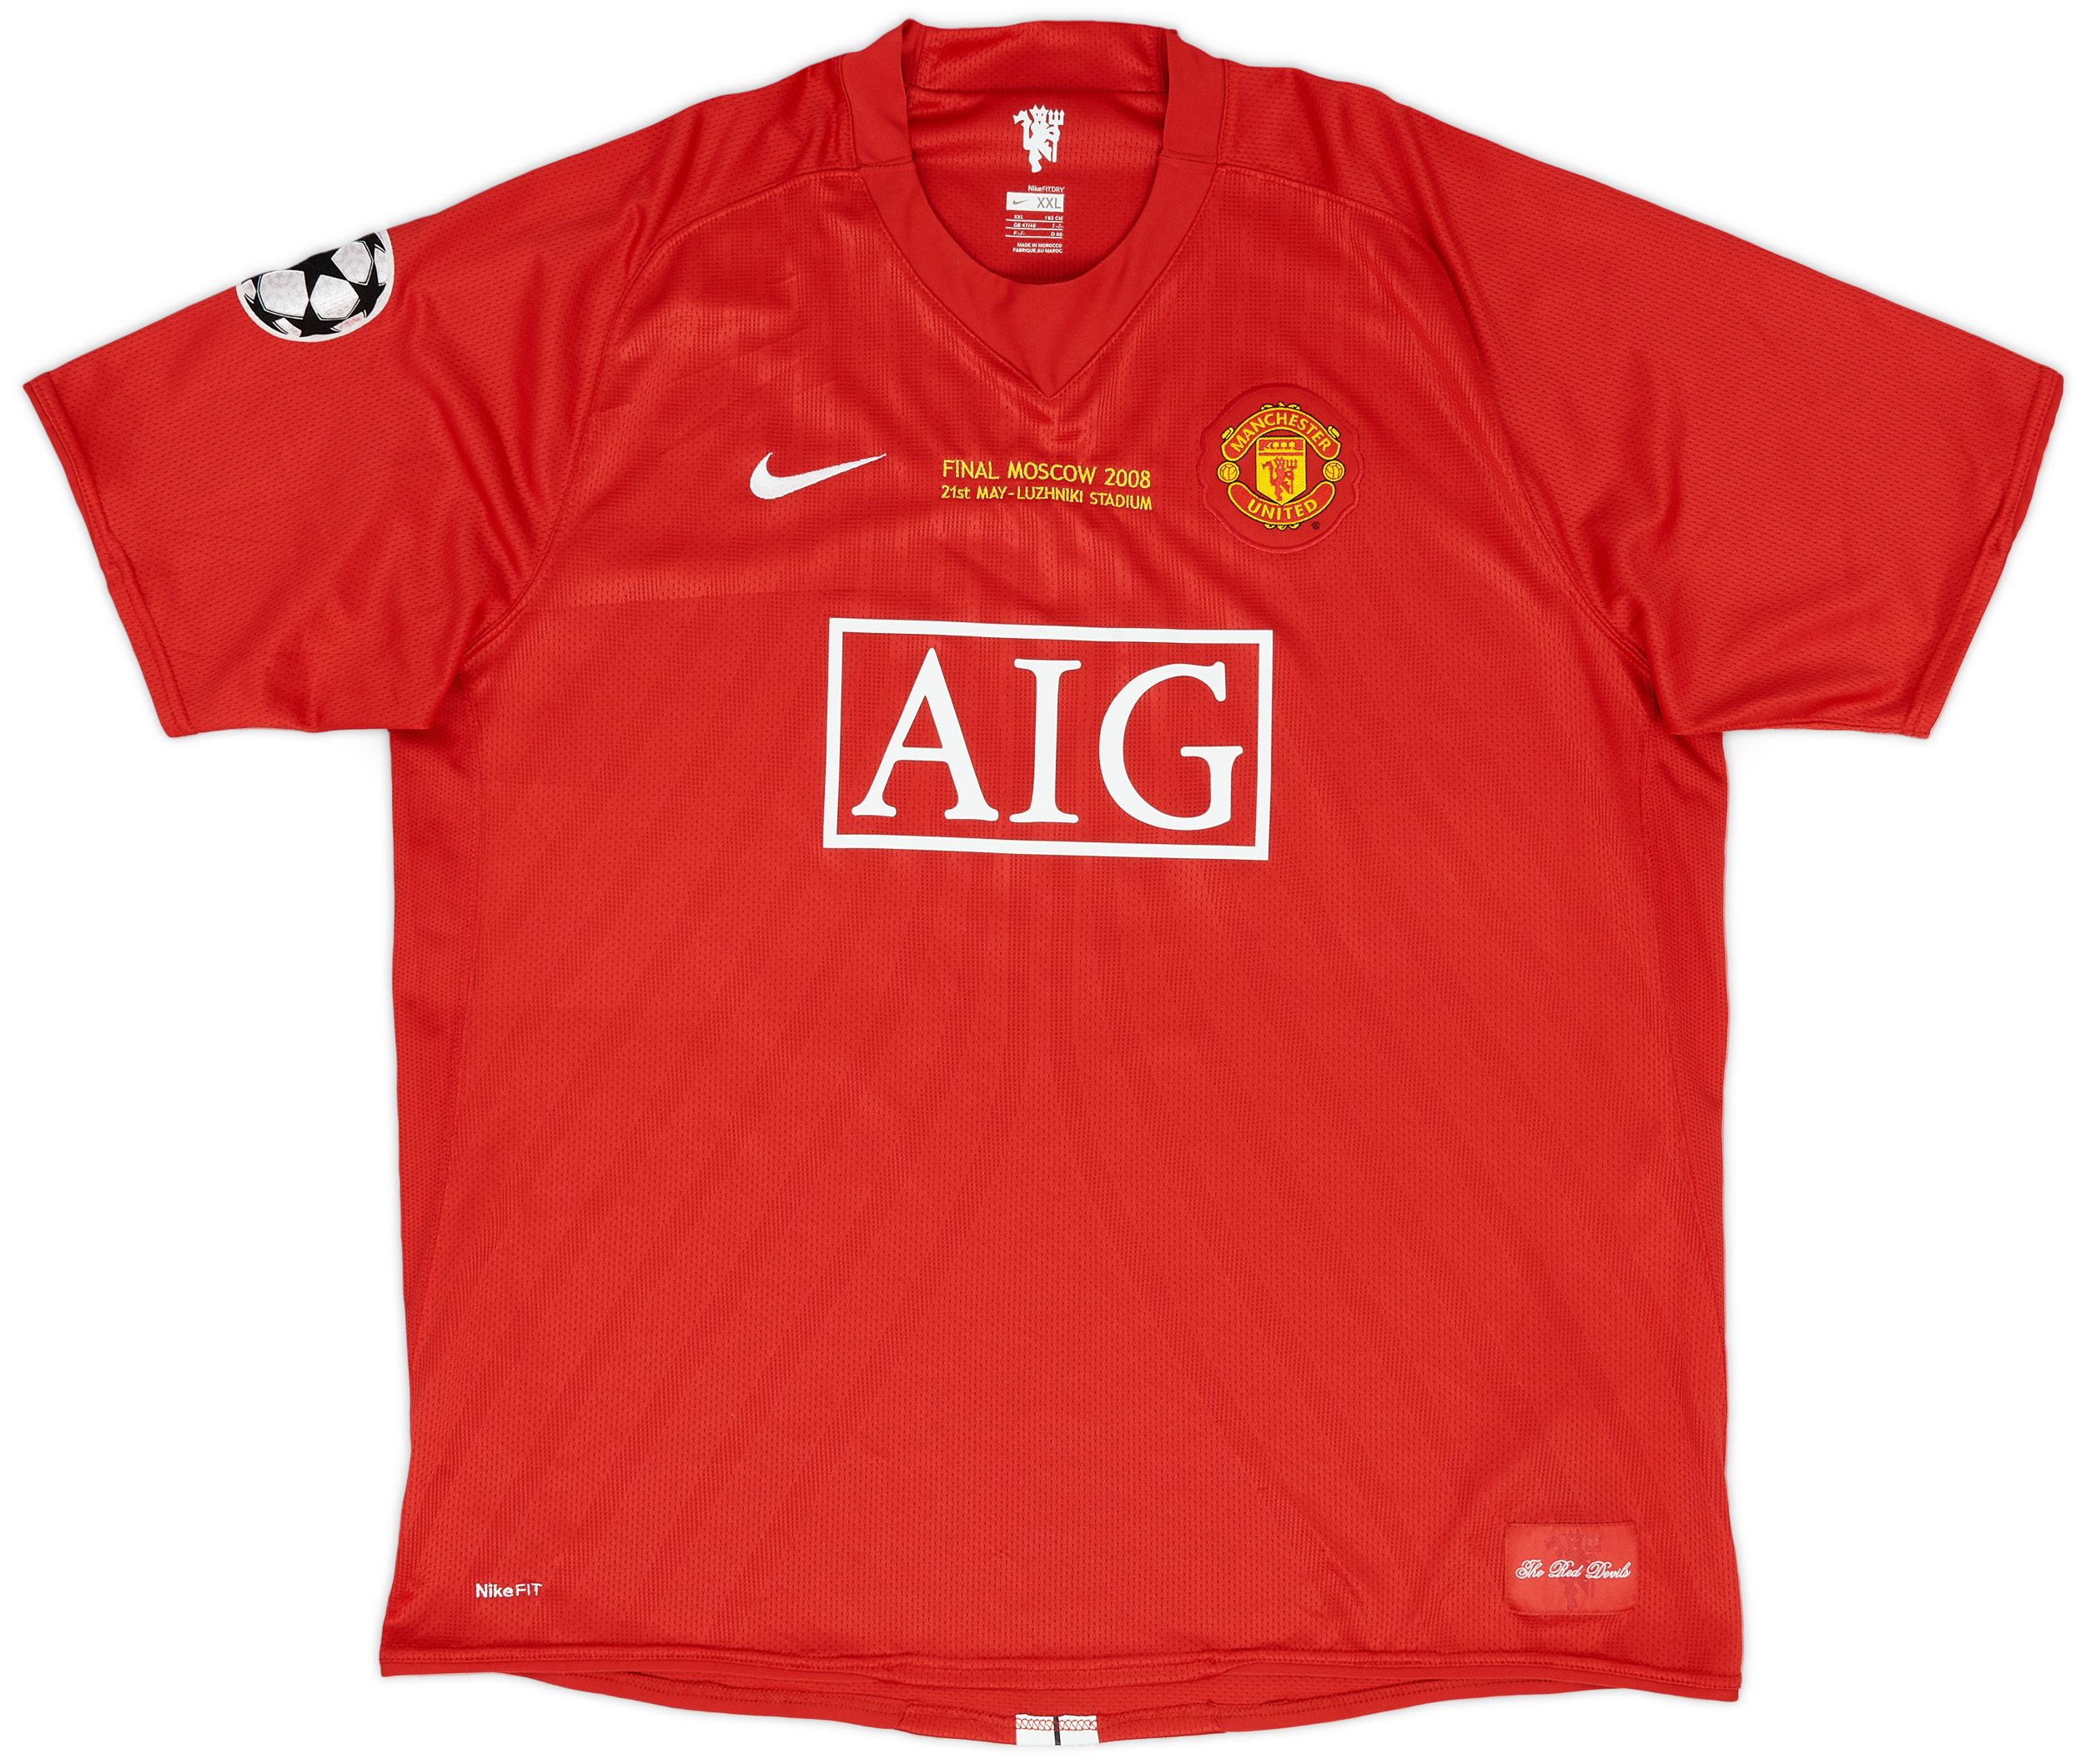 2007-09 Manchester United 'Moscow 2008' CL Home Shirt - 9/10 - ()